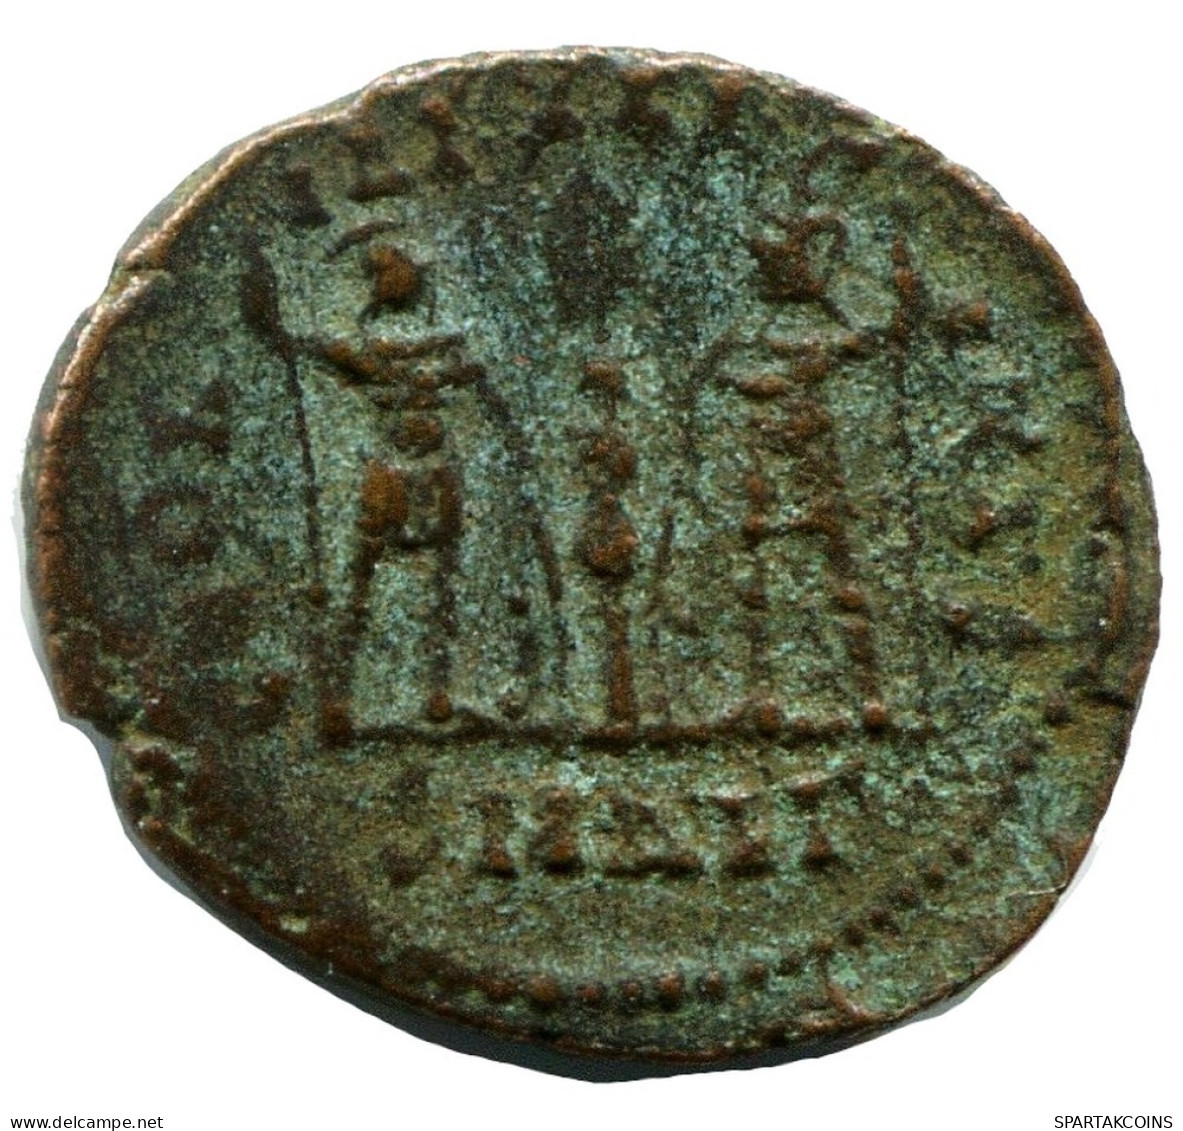 CONSTANS MINTED IN ALEKSANDRIA FOUND IN IHNASYAH HOARD EGYPT #ANC11460.14.U.A - The Christian Empire (307 AD Tot 363 AD)